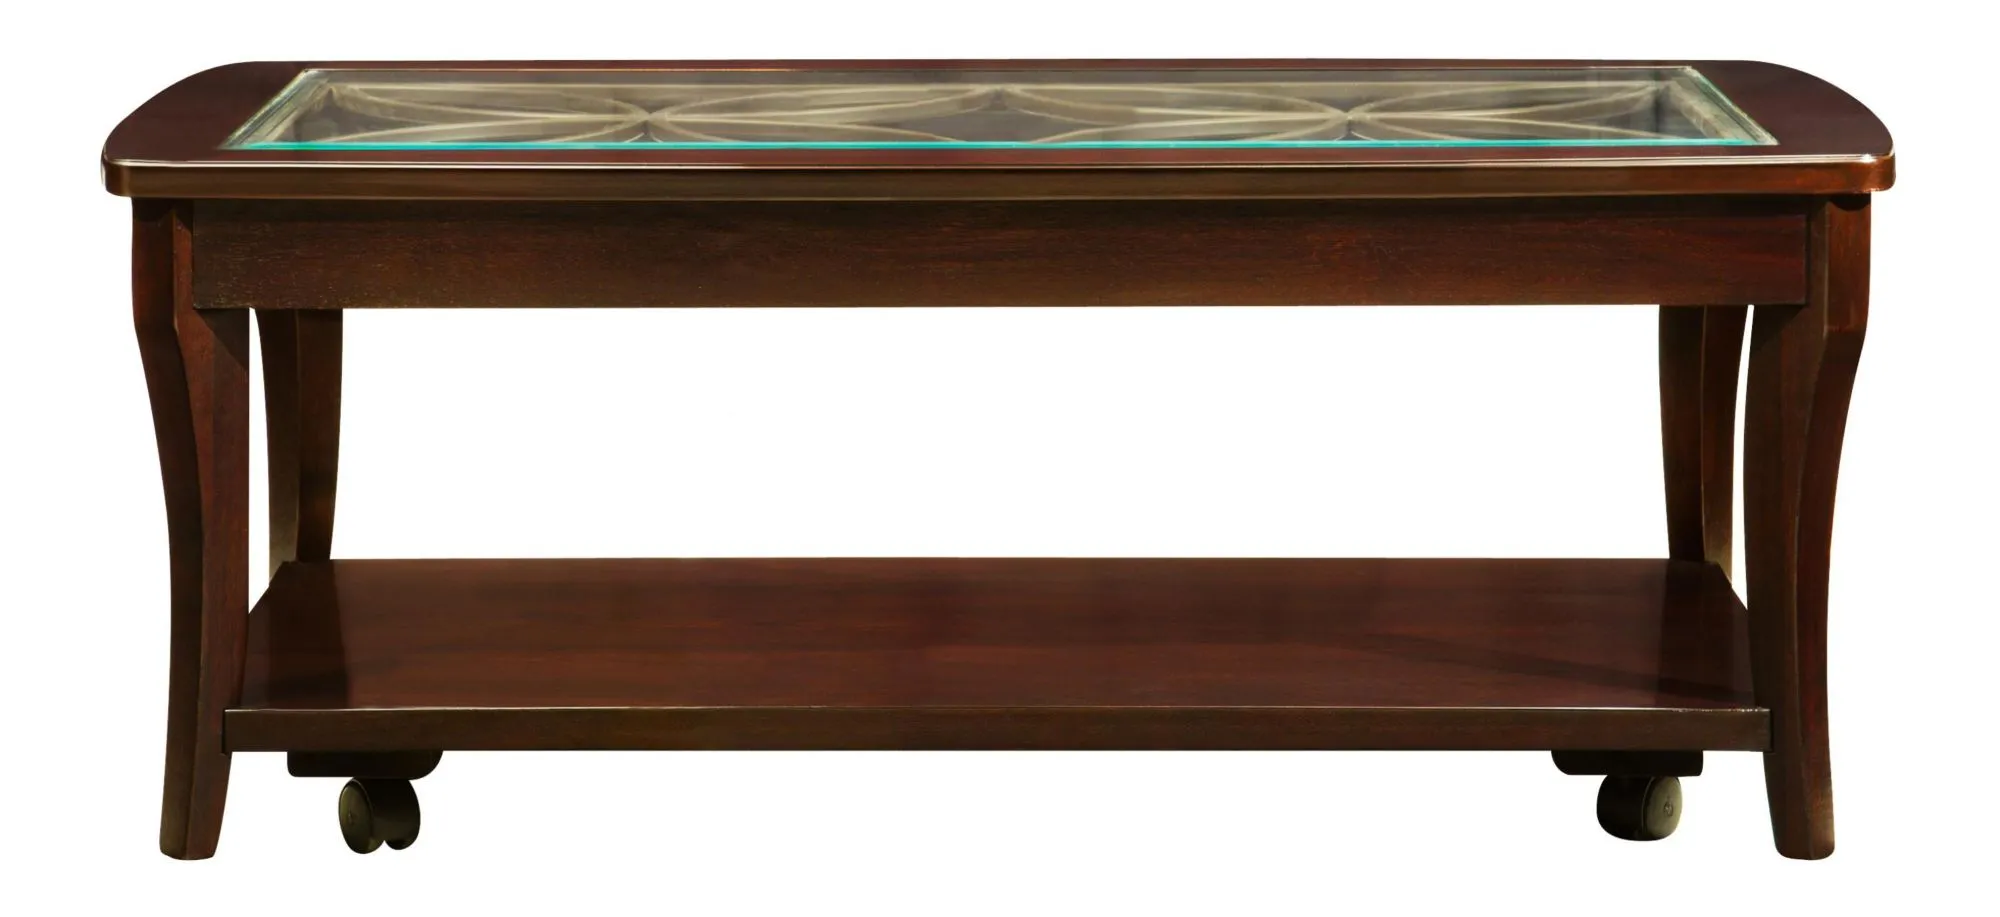 Annandale Rectangular Glass Coffee Table in Dark Mahogany by Riverside Furniture